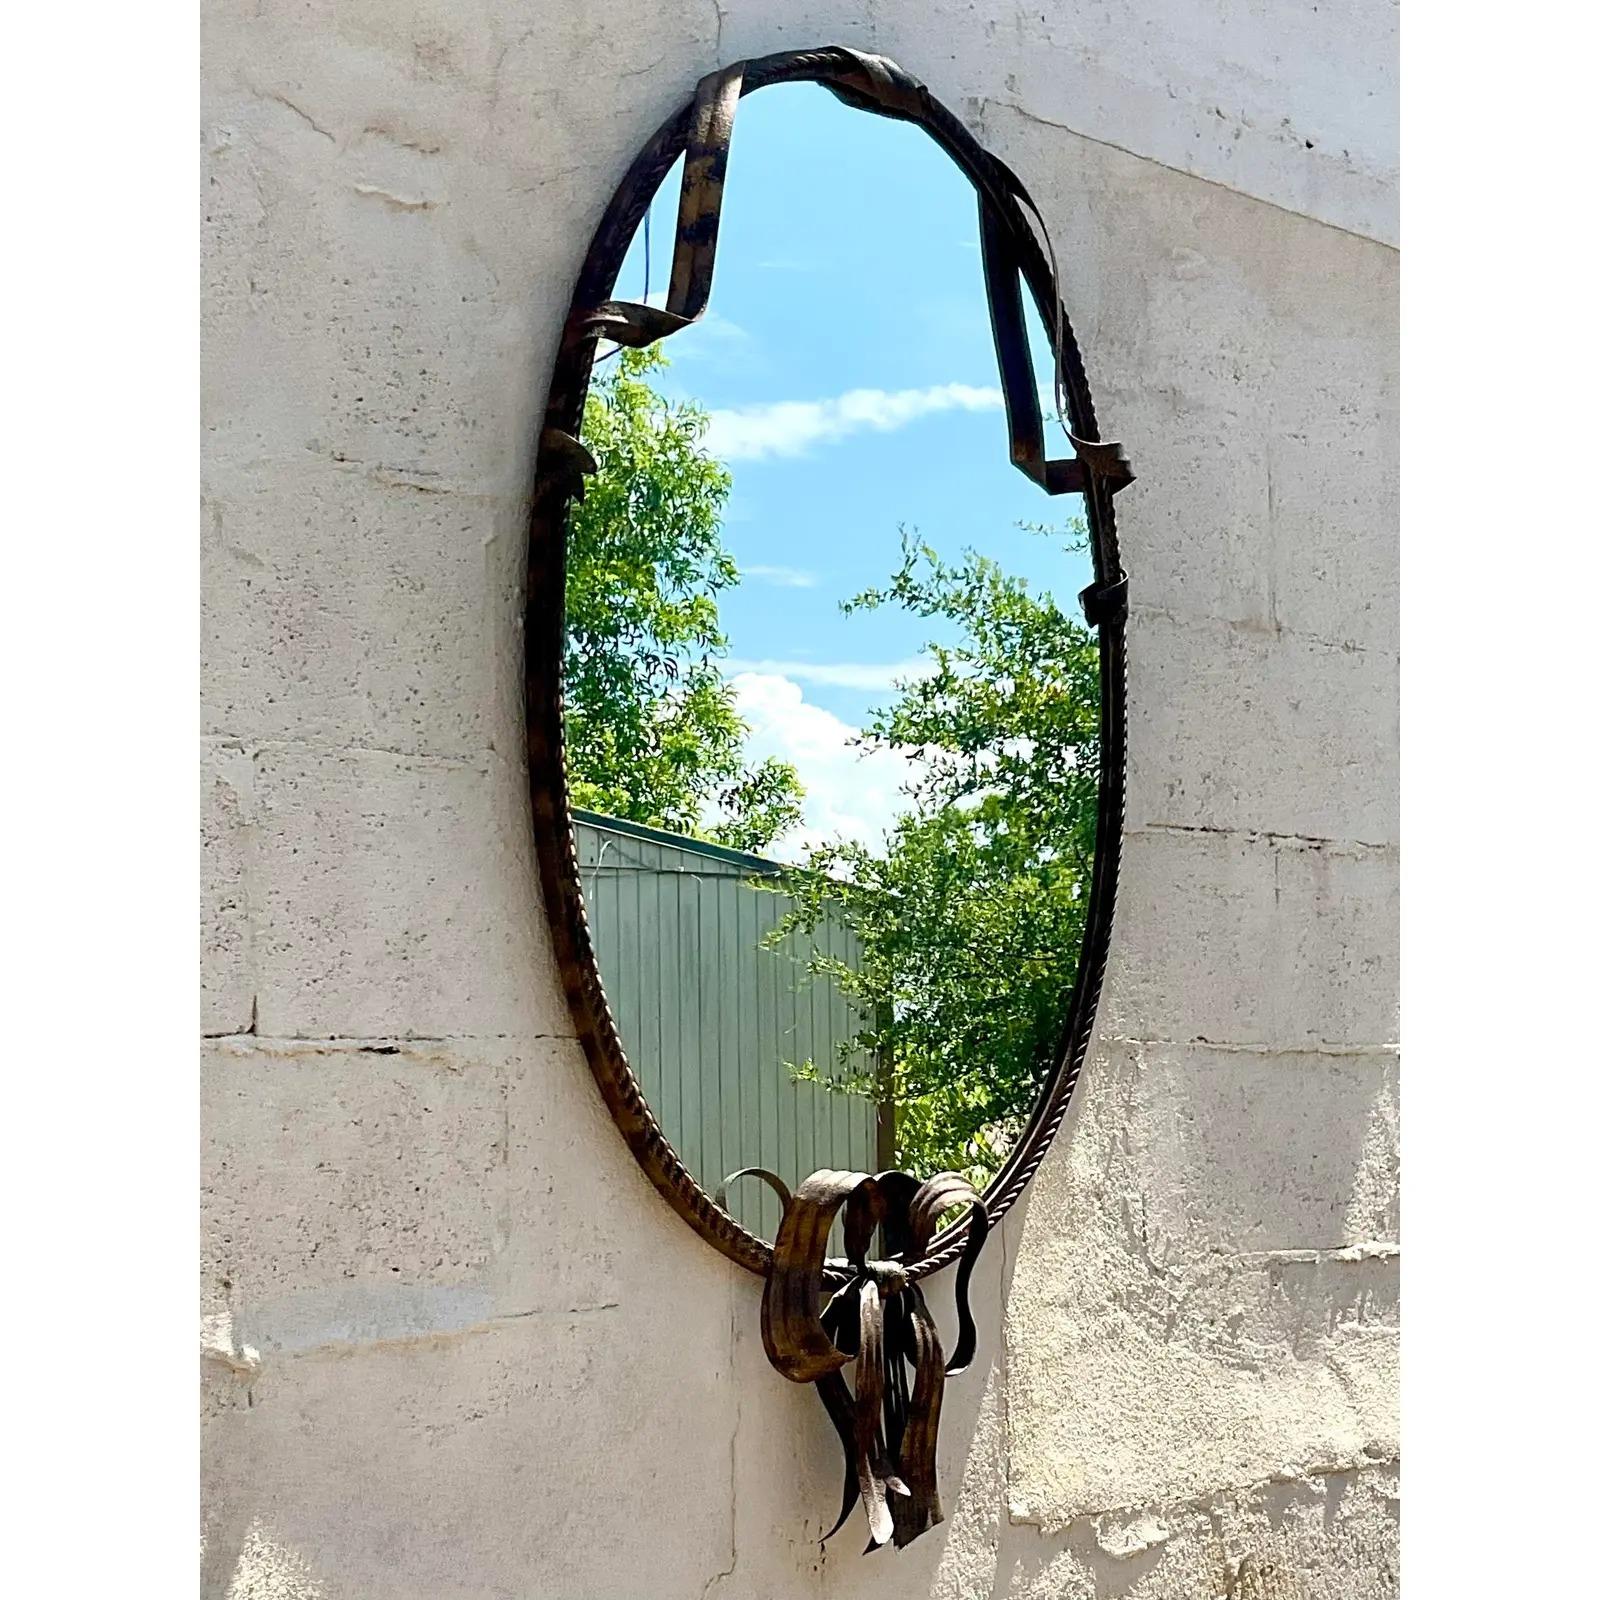 Vintage Regency wall mirror. Beautiful wrapped bow design in a chic distressed finish. Acquired from a Palm Beach estate.